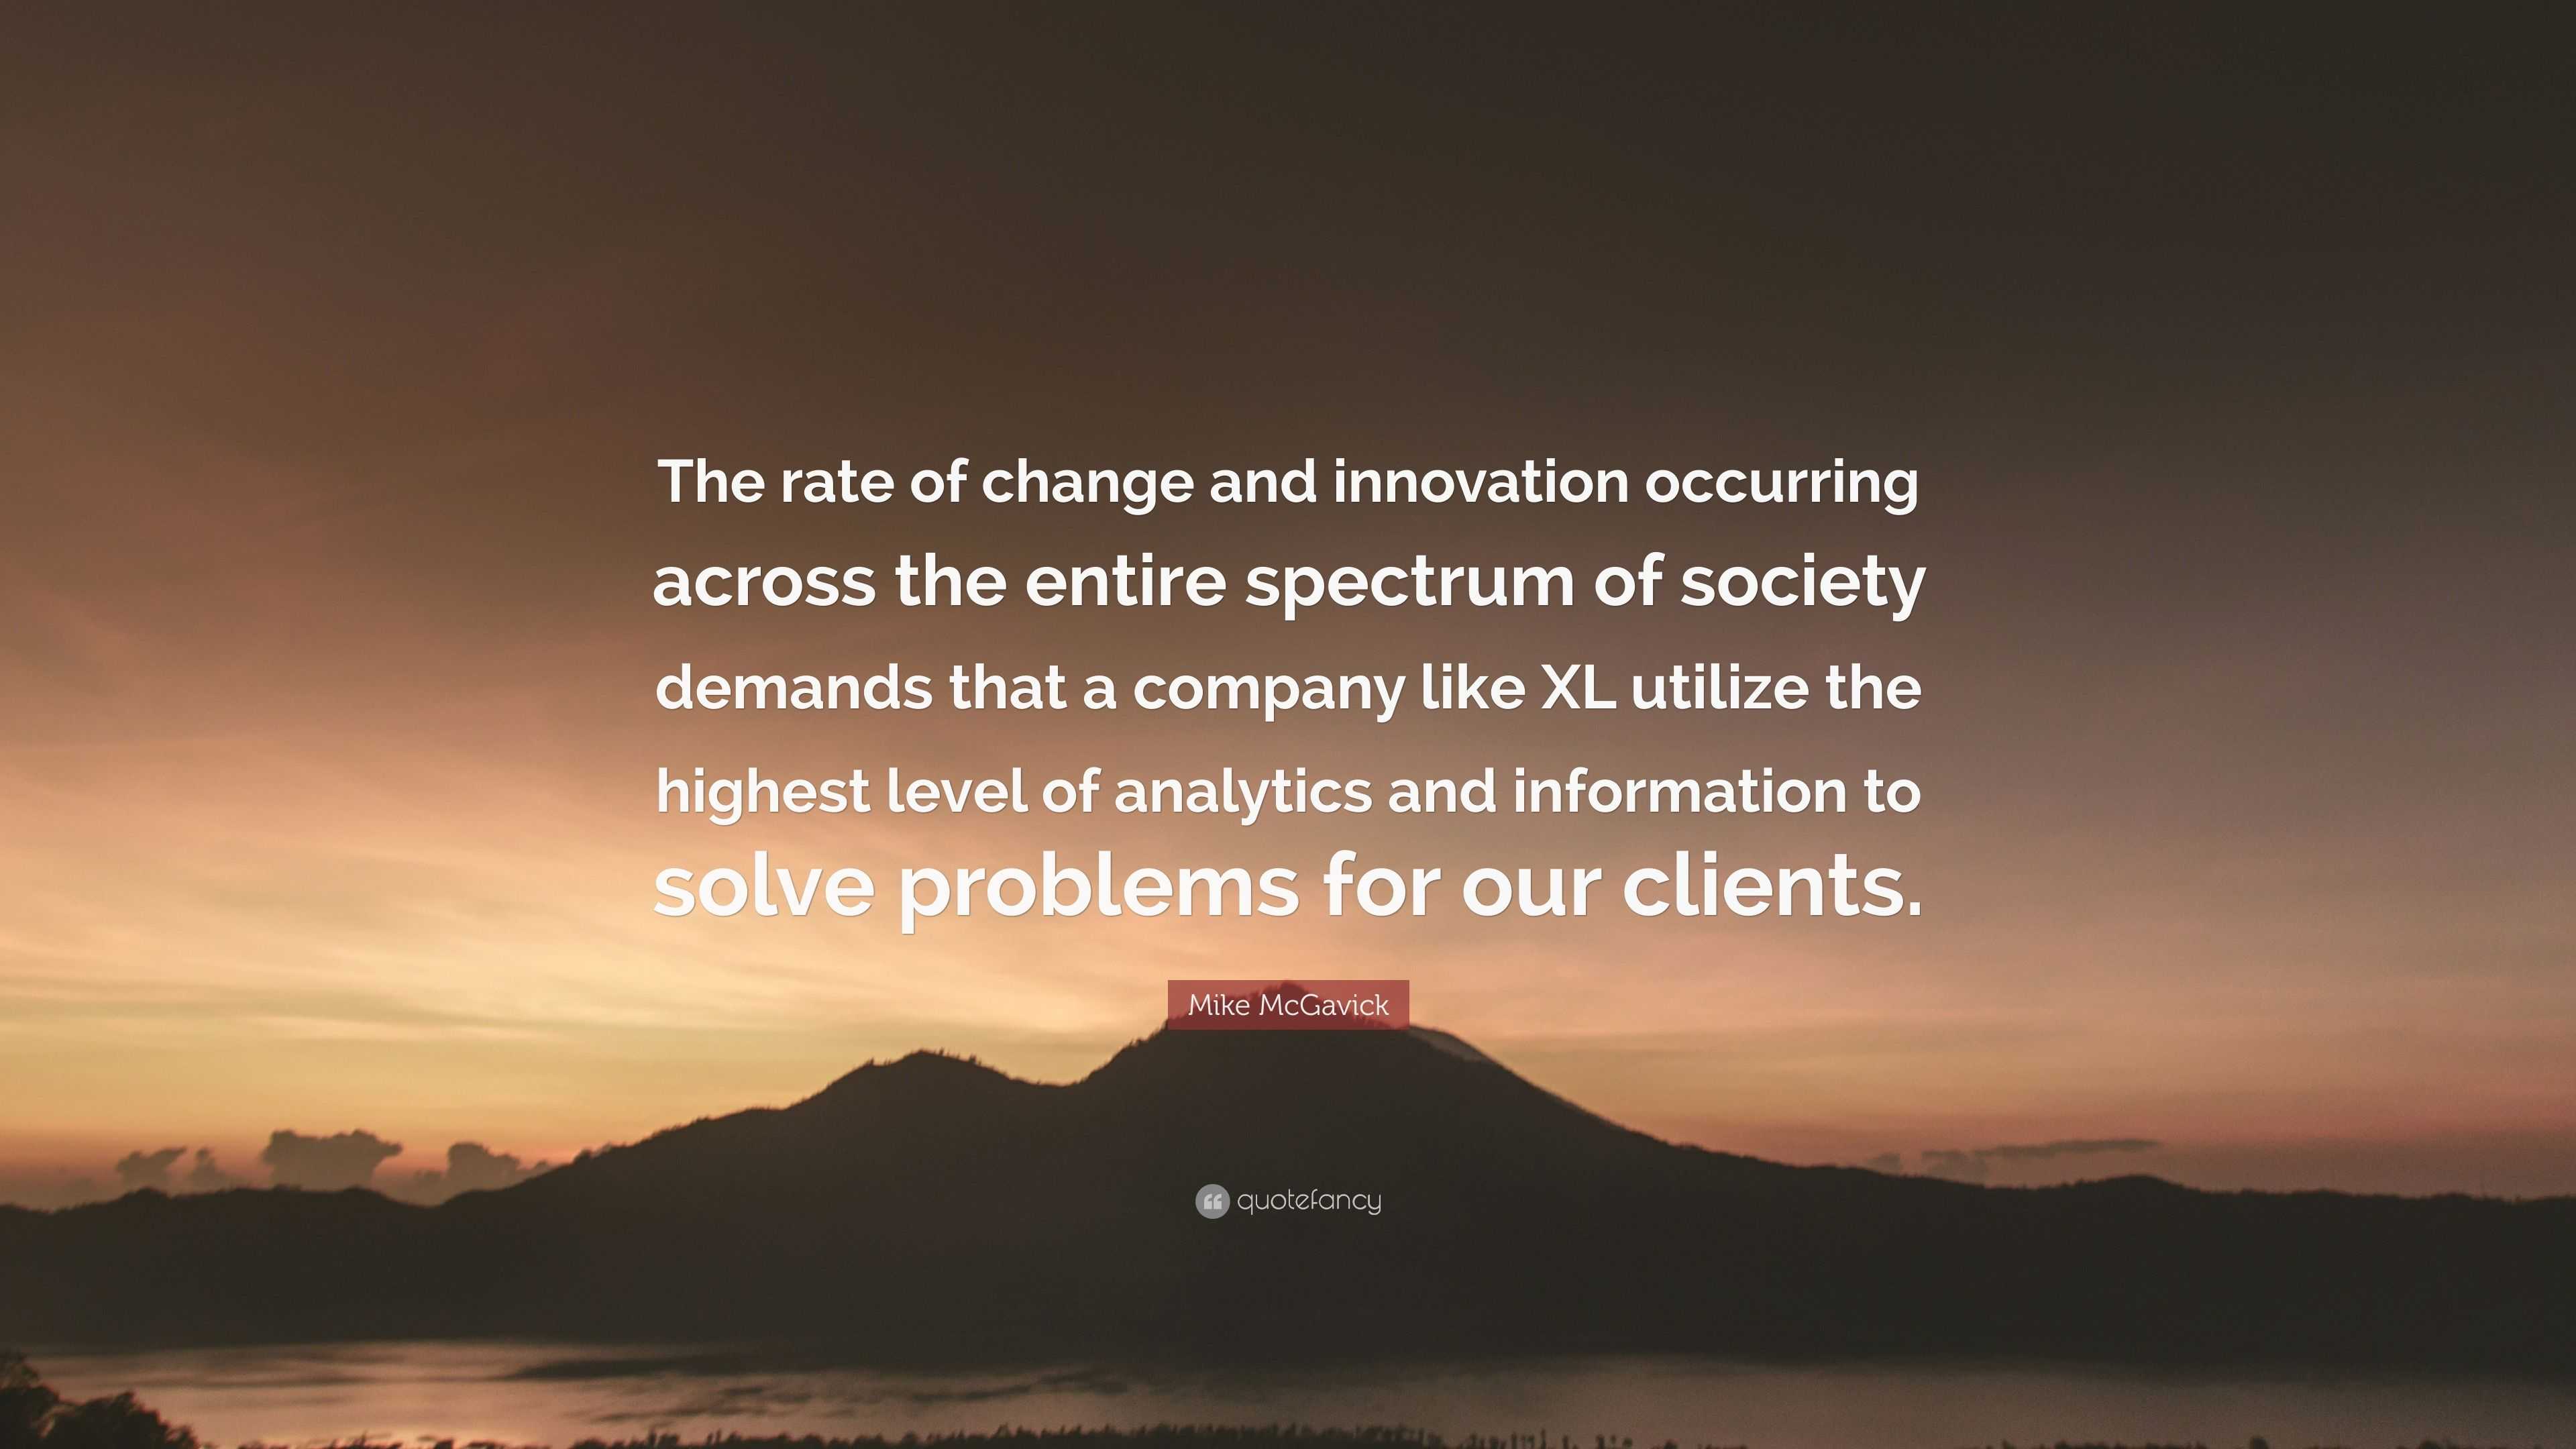 Mike McGavick Quote: “The rate of change and innovation occurring ...